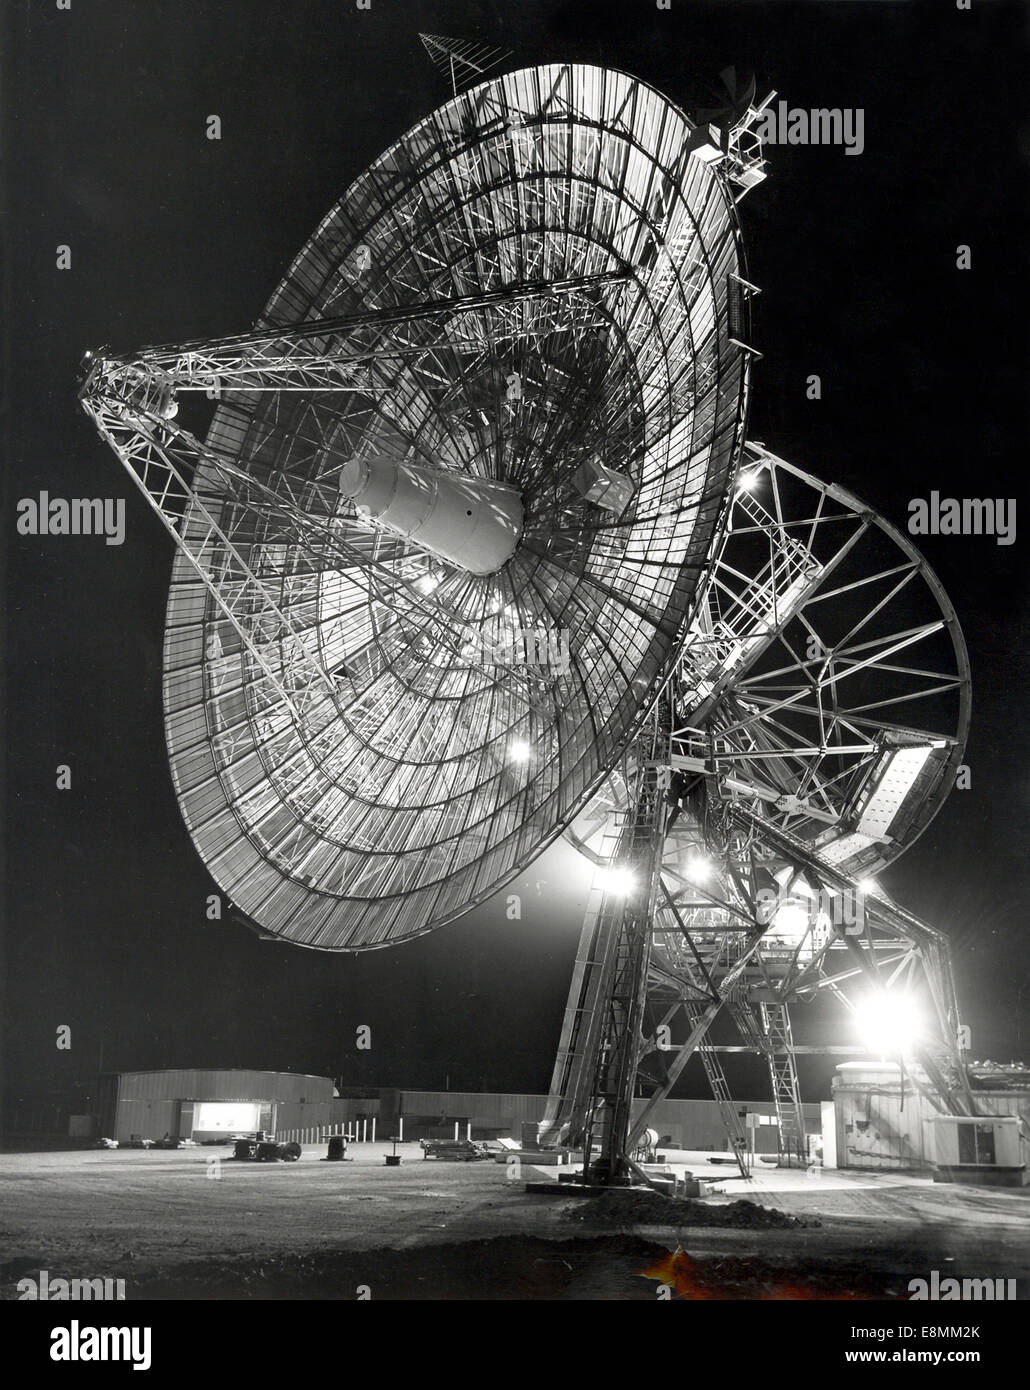 This 26 meter (85 foot) antenna operated in Woomera (Island Lagoon), Australia at Deep Space Station (DSS) 41, established in Au Stock Photo